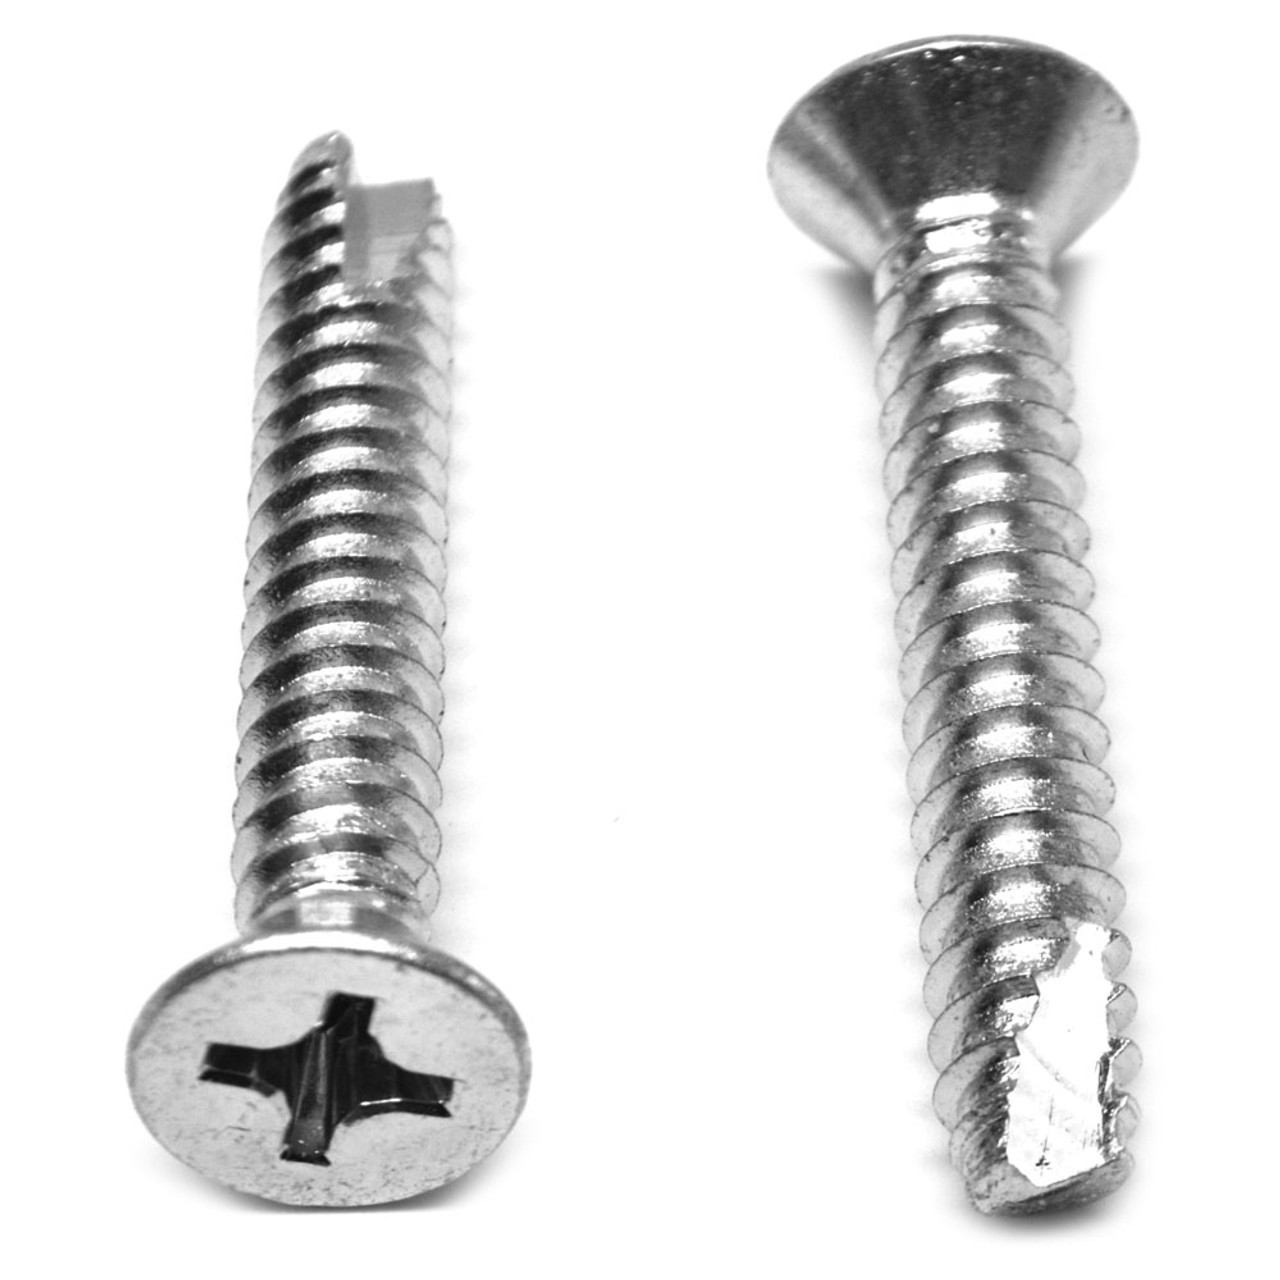 #8-18 Thread Size Zinc Plated Finish Pack of 100 3/4 Length Small Parts 08125PP Pan Head Phillips Drive 3/4 Length Steel Thread Cutting Screw Type 25 Pack of 100